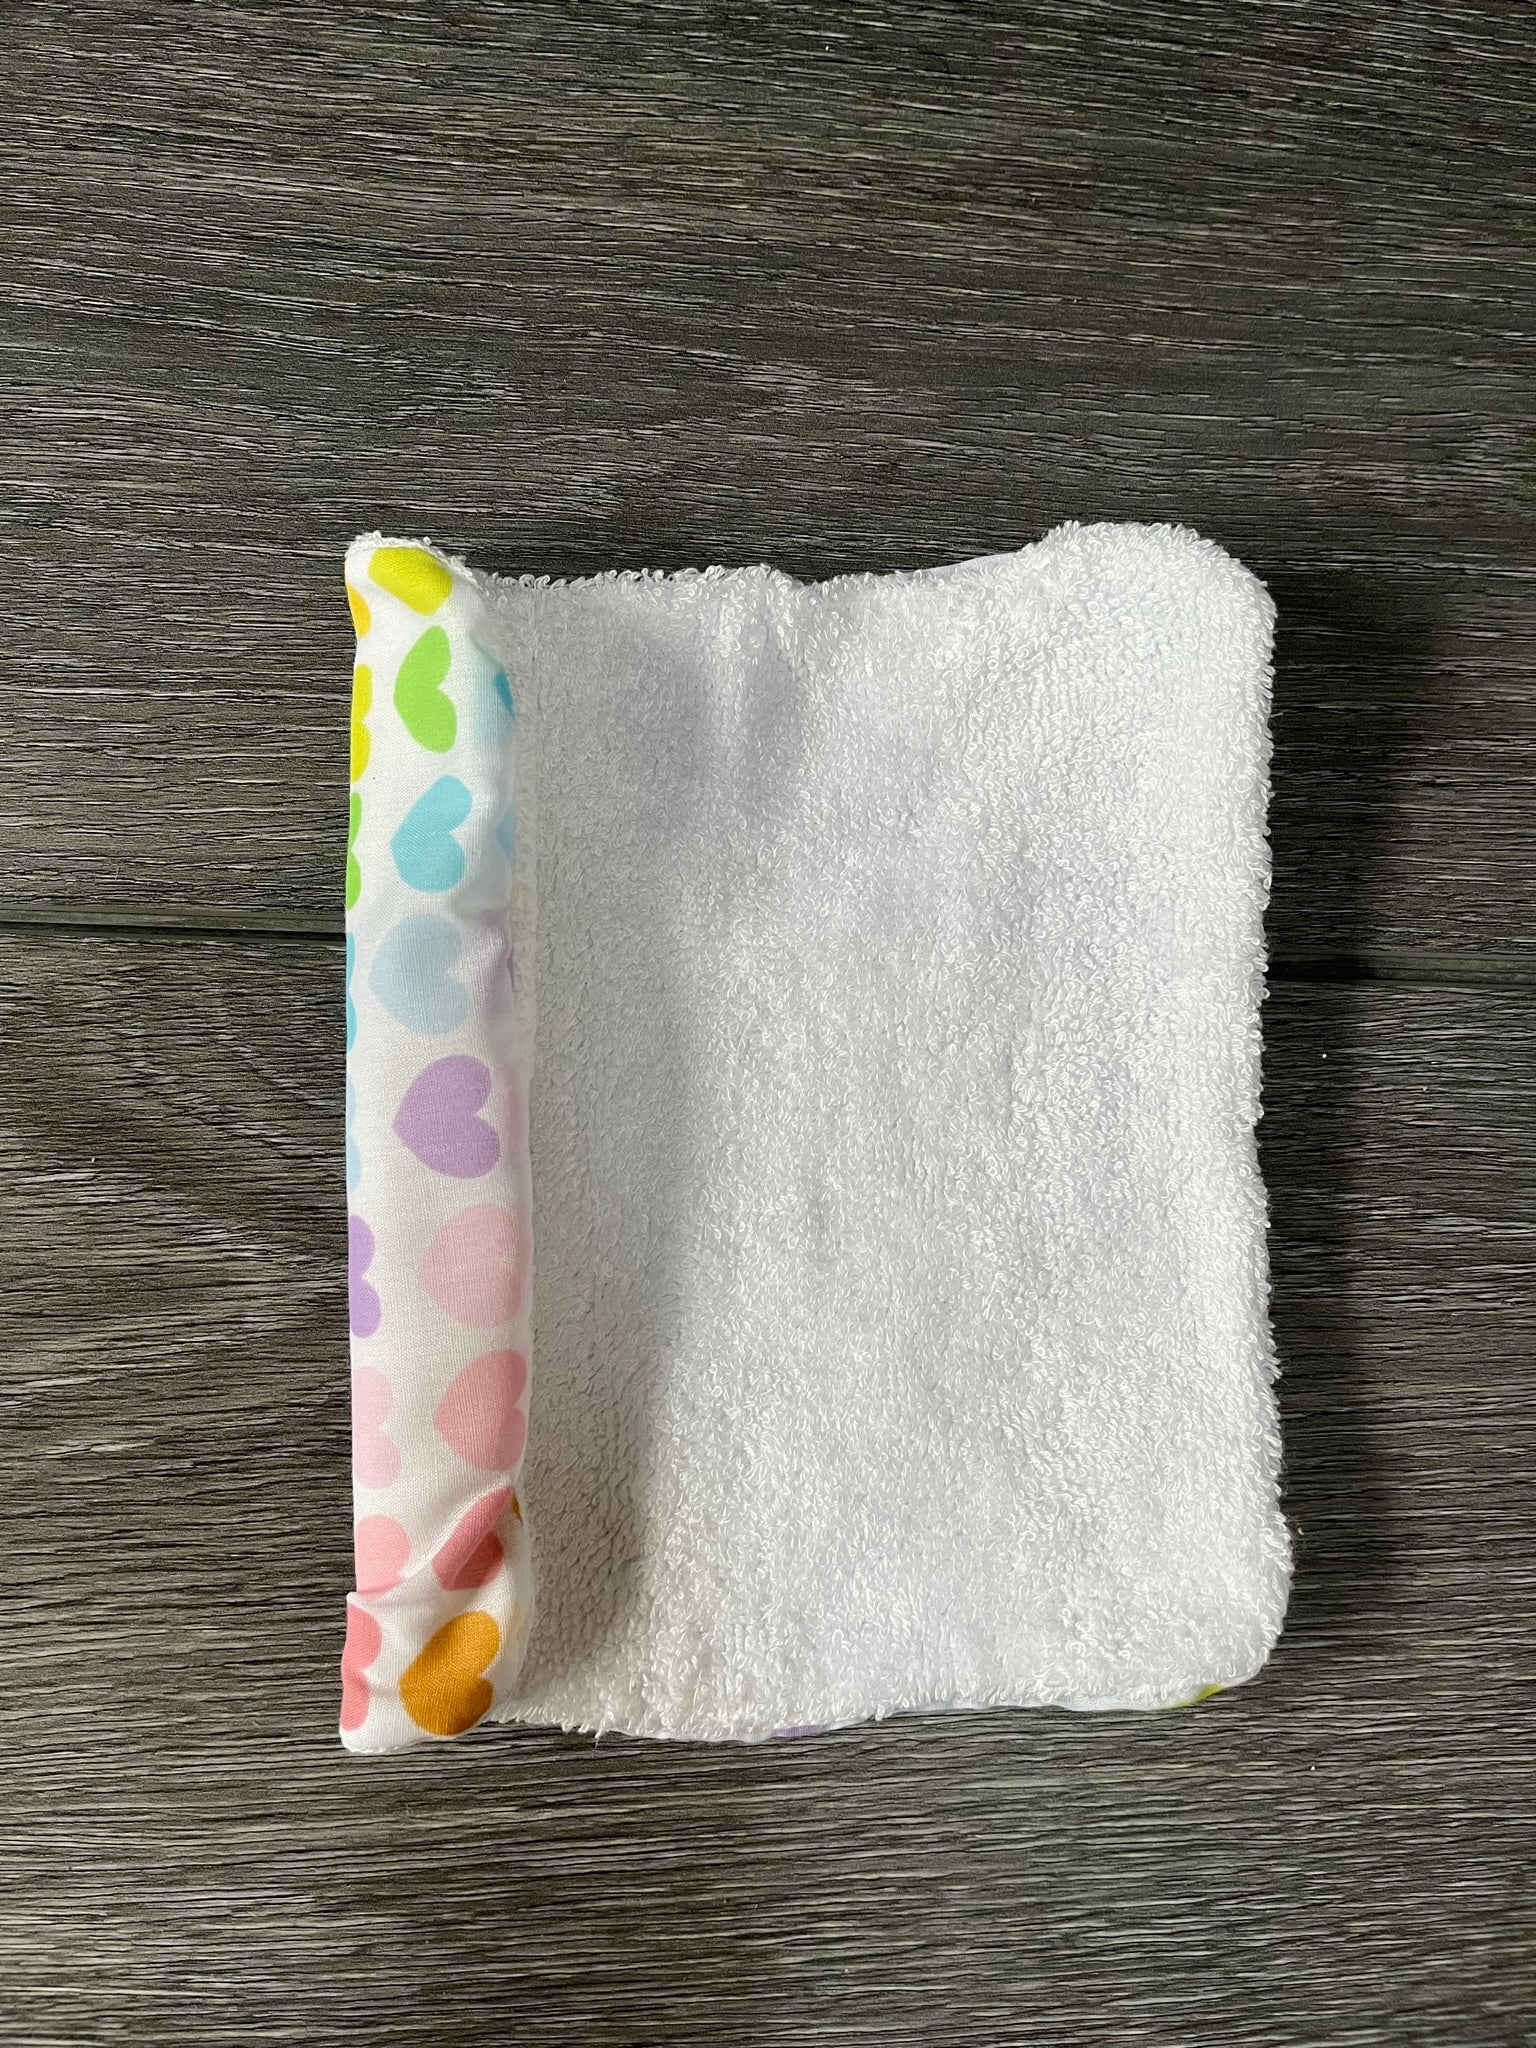 Luxury Cotton and Bamboo Face Flannel - Rainbow Hearts Open